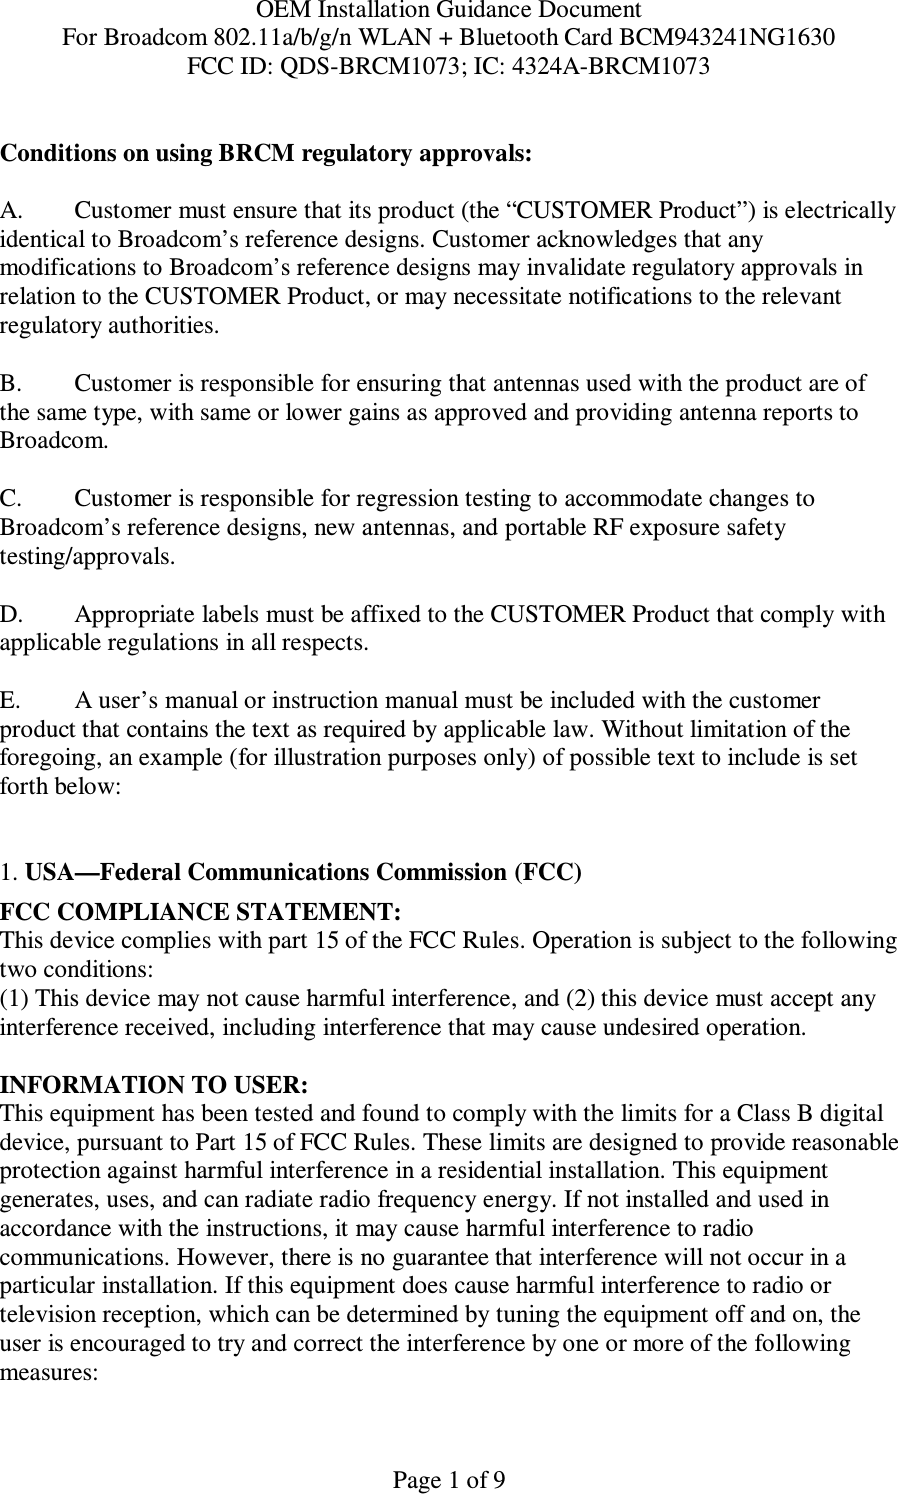 OEM Installation Guidance Document For Broadcom 802.11a/b/g/n WLAN + Bluetooth Card BCM943241NG1630 FCC ID: QDS-BRCM1073; IC: 4324A-BRCM1073  Page 1 of 9  Conditions on using BRCM regulatory approvals:   A.  Customer must ensure that its product (the “CUSTOMER Product”) is electrically identical to Broadcom’s reference designs. Customer acknowledges that any modifications to Broadcom’s reference designs may invalidate regulatory approvals in relation to the CUSTOMER Product, or may necessitate notifications to the relevant regulatory authorities.  B.   Customer is responsible for ensuring that antennas used with the product are of the same type, with same or lower gains as approved and providing antenna reports to Broadcom.  C.   Customer is responsible for regression testing to accommodate changes to Broadcom’s reference designs, new antennas, and portable RF exposure safety testing/approvals.  D.  Appropriate labels must be affixed to the CUSTOMER Product that comply with applicable regulations in all respects.    E.  A user’s manual or instruction manual must be included with the customer product that contains the text as required by applicable law. Without limitation of the foregoing, an example (for illustration purposes only) of possible text to include is set forth below:    1. USA—Federal Communications Commission (FCC) FCC COMPLIANCE STATEMENT: This device complies with part 15 of the FCC Rules. Operation is subject to the following two conditions: (1) This device may not cause harmful interference, and (2) this device must accept any interference received, including interference that may cause undesired operation.  INFORMATION TO USER: This equipment has been tested and found to comply with the limits for a Class B digital device, pursuant to Part 15 of FCC Rules. These limits are designed to provide reasonable protection against harmful interference in a residential installation. This equipment generates, uses, and can radiate radio frequency energy. If not installed and used in accordance with the instructions, it may cause harmful interference to radio communications. However, there is no guarantee that interference will not occur in a particular installation. If this equipment does cause harmful interference to radio or television reception, which can be determined by tuning the equipment off and on, the user is encouraged to try and correct the interference by one or more of the following measures:    